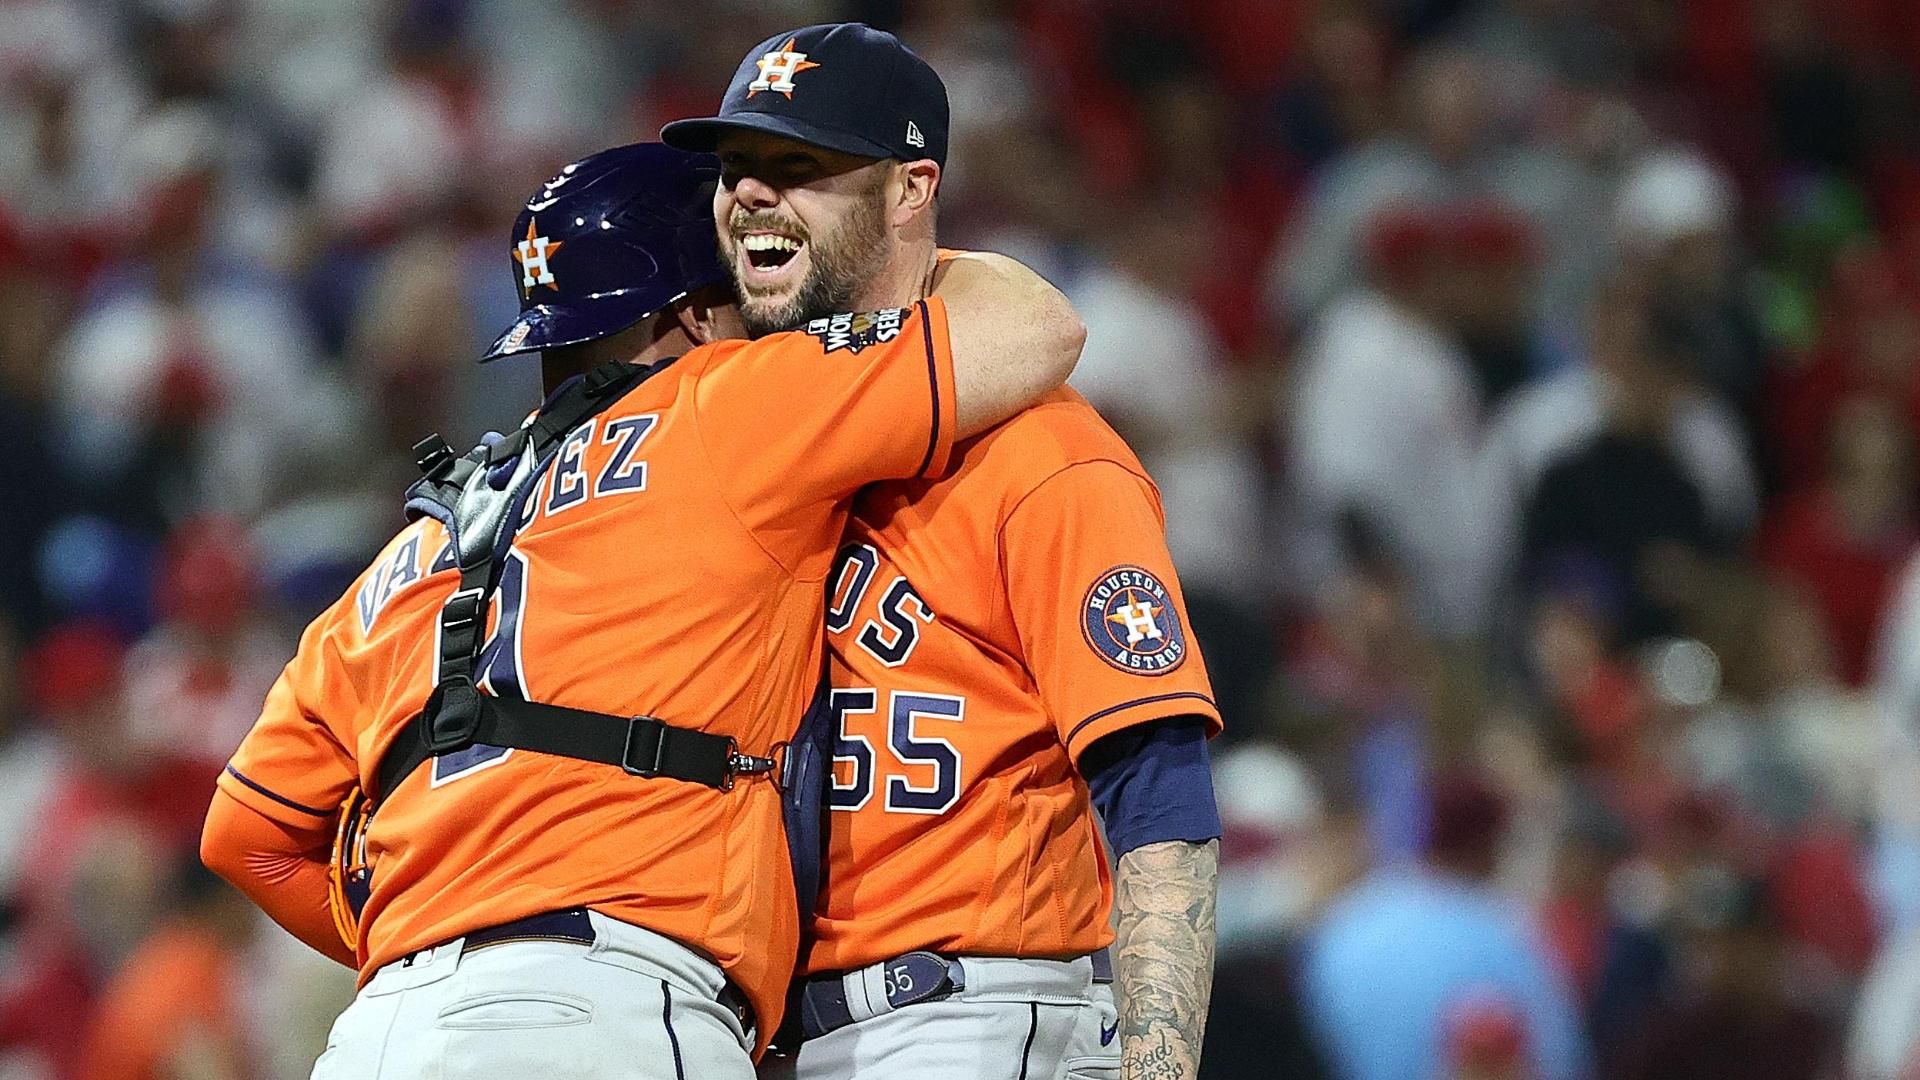 Javier, Astros bullpen combine to pitch second no-hitter in World Series  history